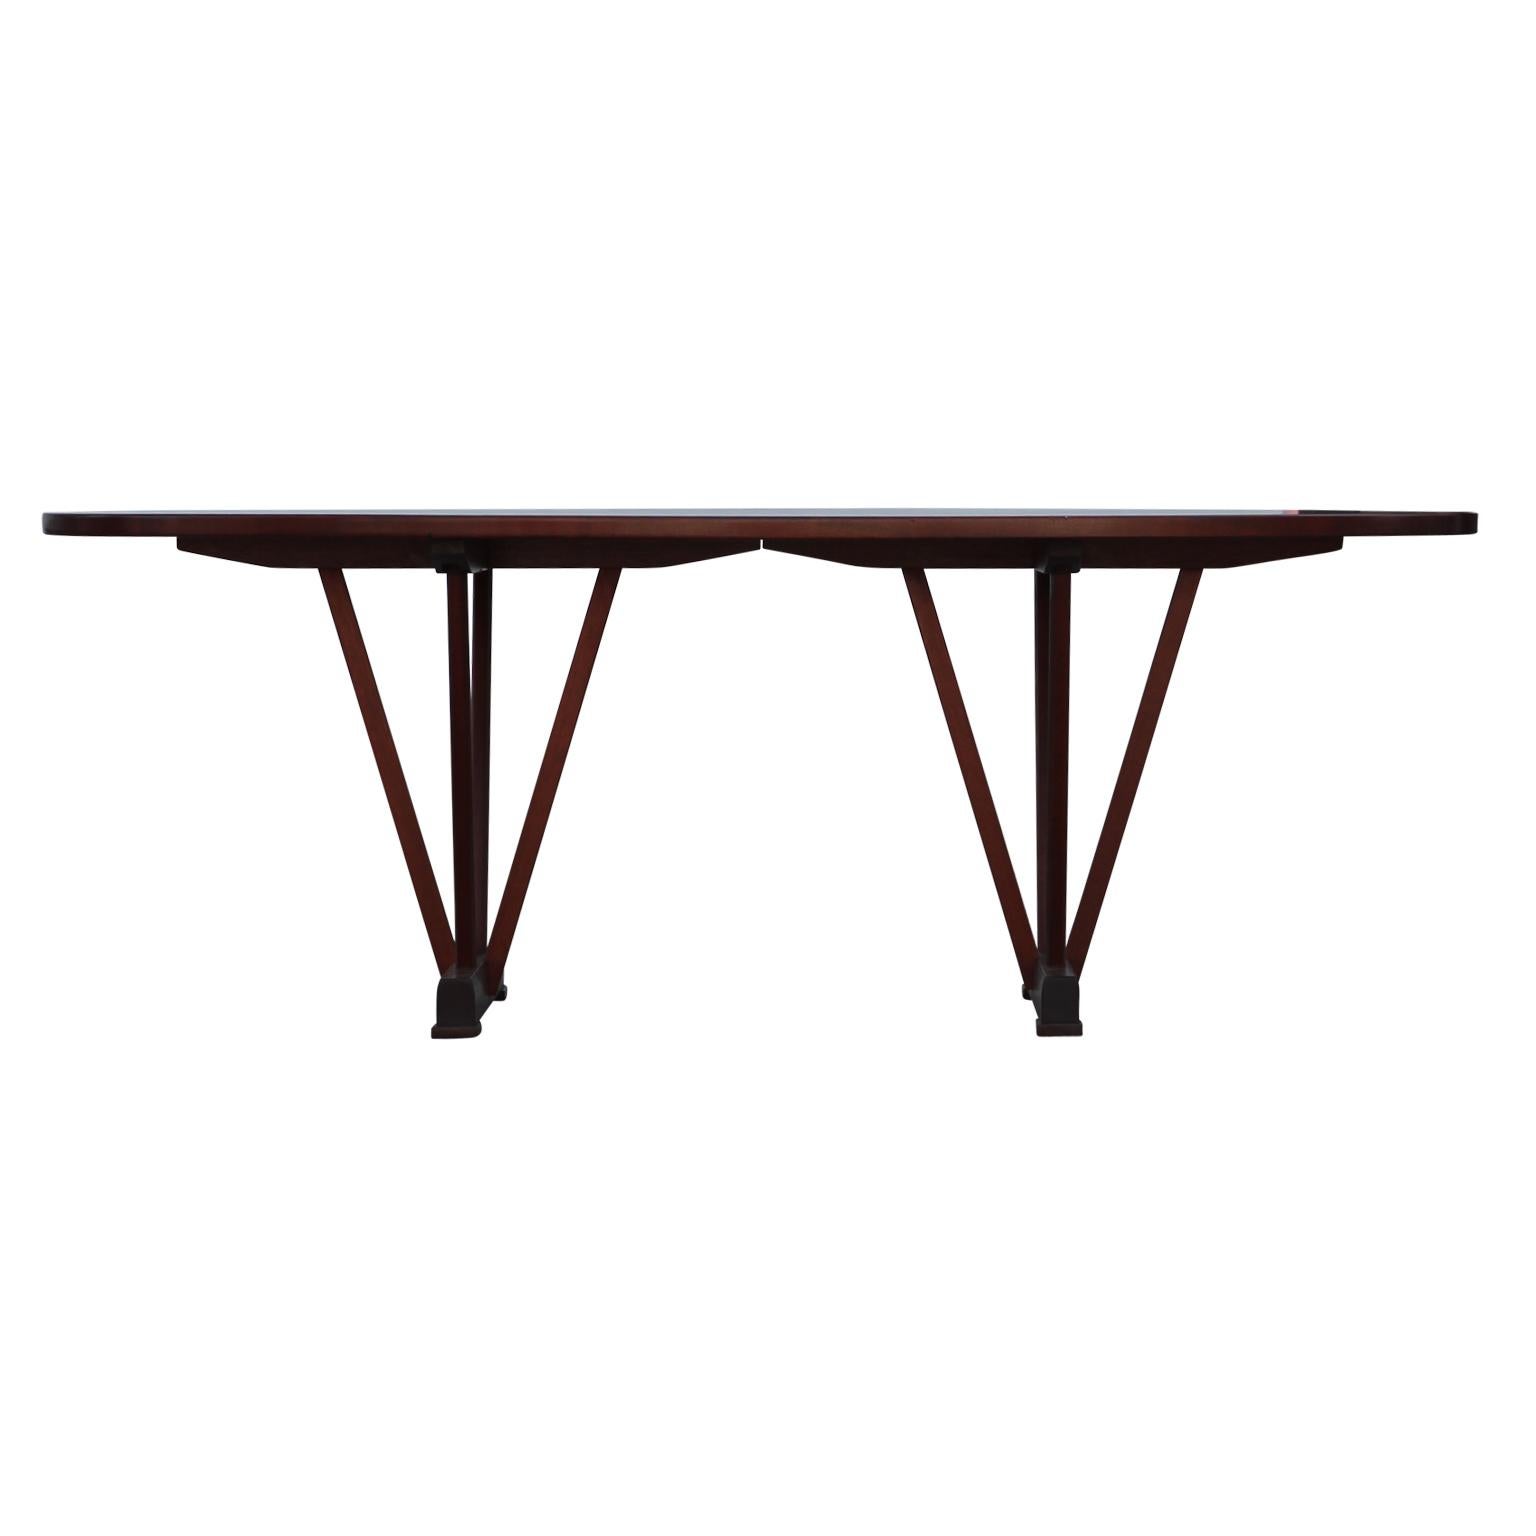 Unique Asian inspired handmade oval coffee table with a modern sculptural design. The table is made out of a beautiful quilted mahogany.